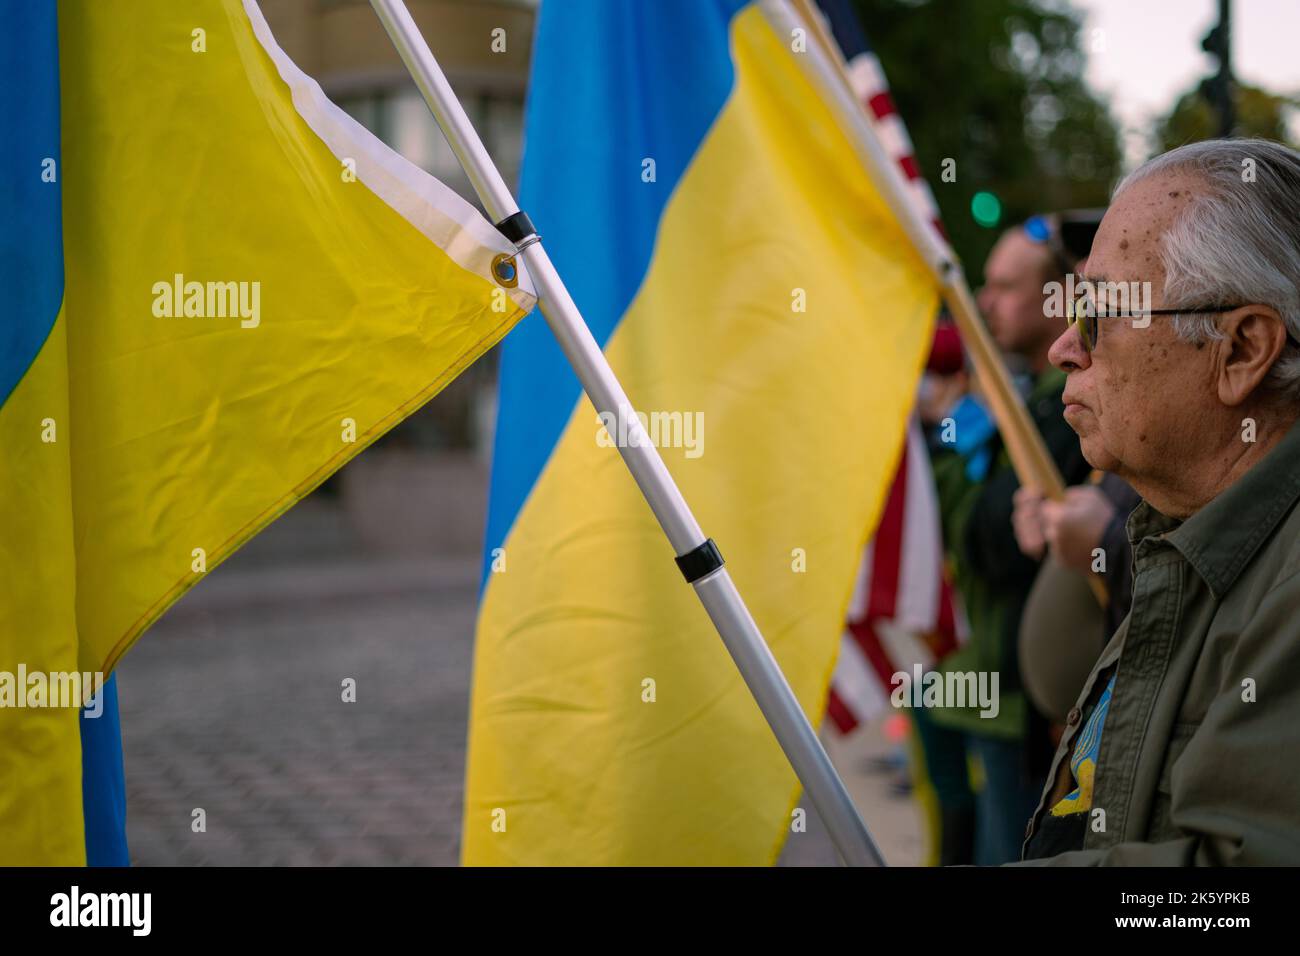 A man holds the Ukrainian in front of the Russian Embassy. Demonstrators gathered in front of the Embassy of the Russian Federation to protest against the recent war crimes committed in Ukraine. The protesters sang traditional Ukrainian songs and yelled at staff workers entering and exiting the embassy. (Photo by Jordan Tovin / SOPA Images/Sipa USA) Stock Photo